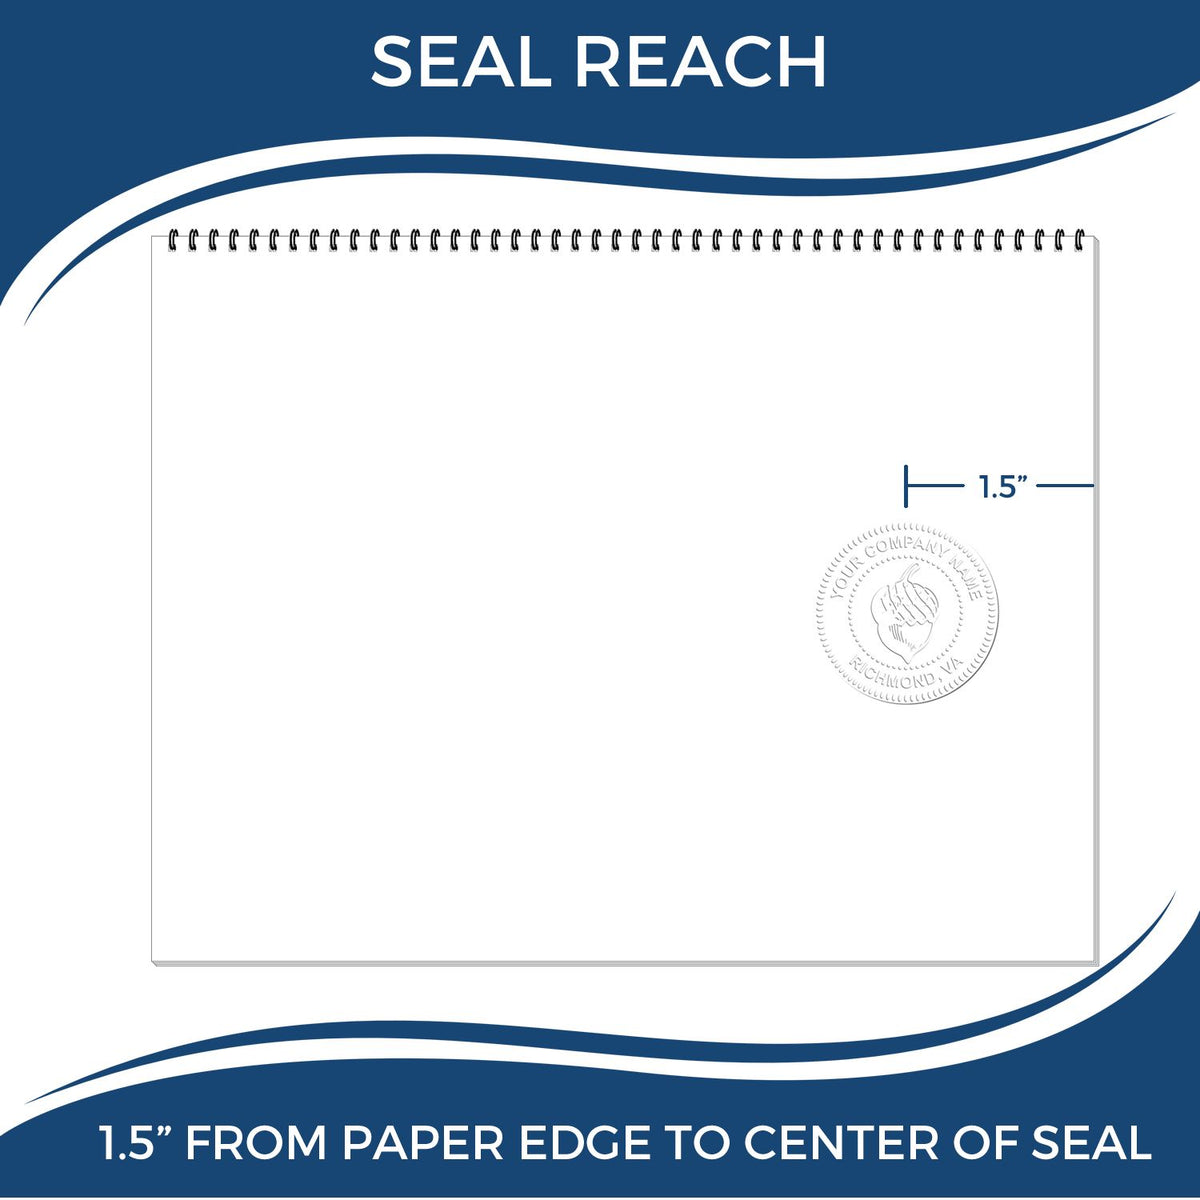 An infographic showing the seal reach which is represented by a ruler and a miniature seal image of the South Carolina Geologist Desk Seal